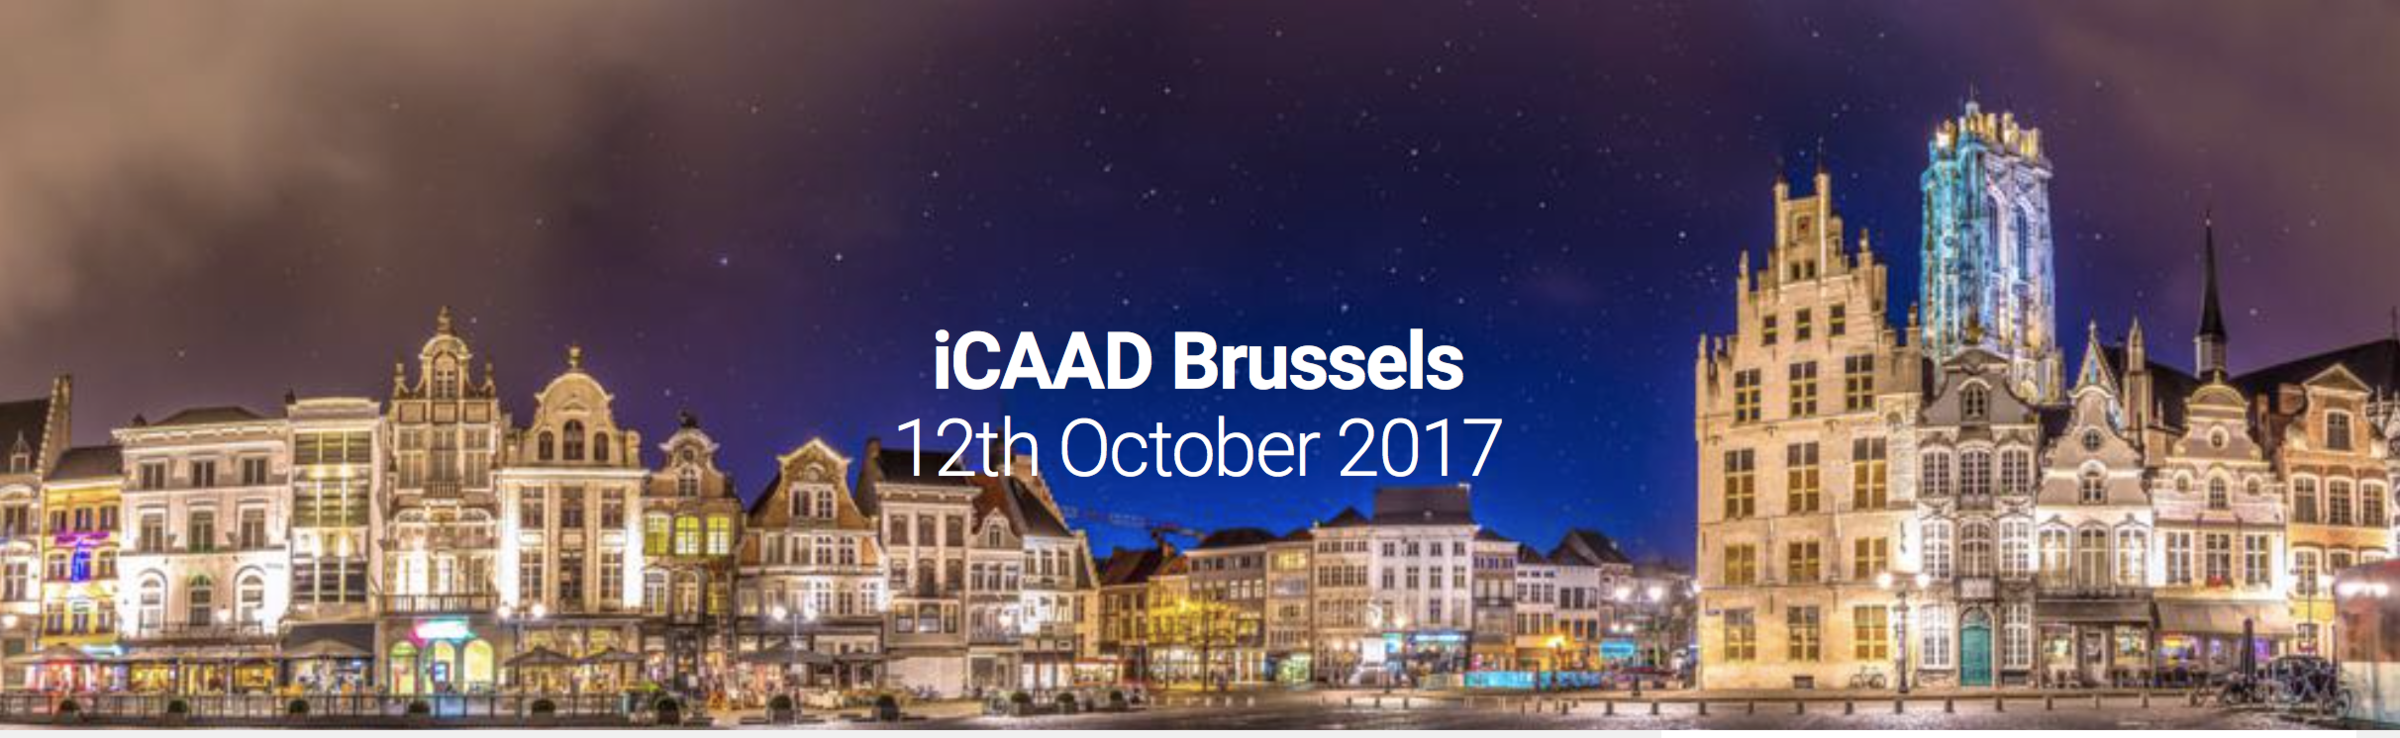 ICAAD Brussels October 12th,  2017